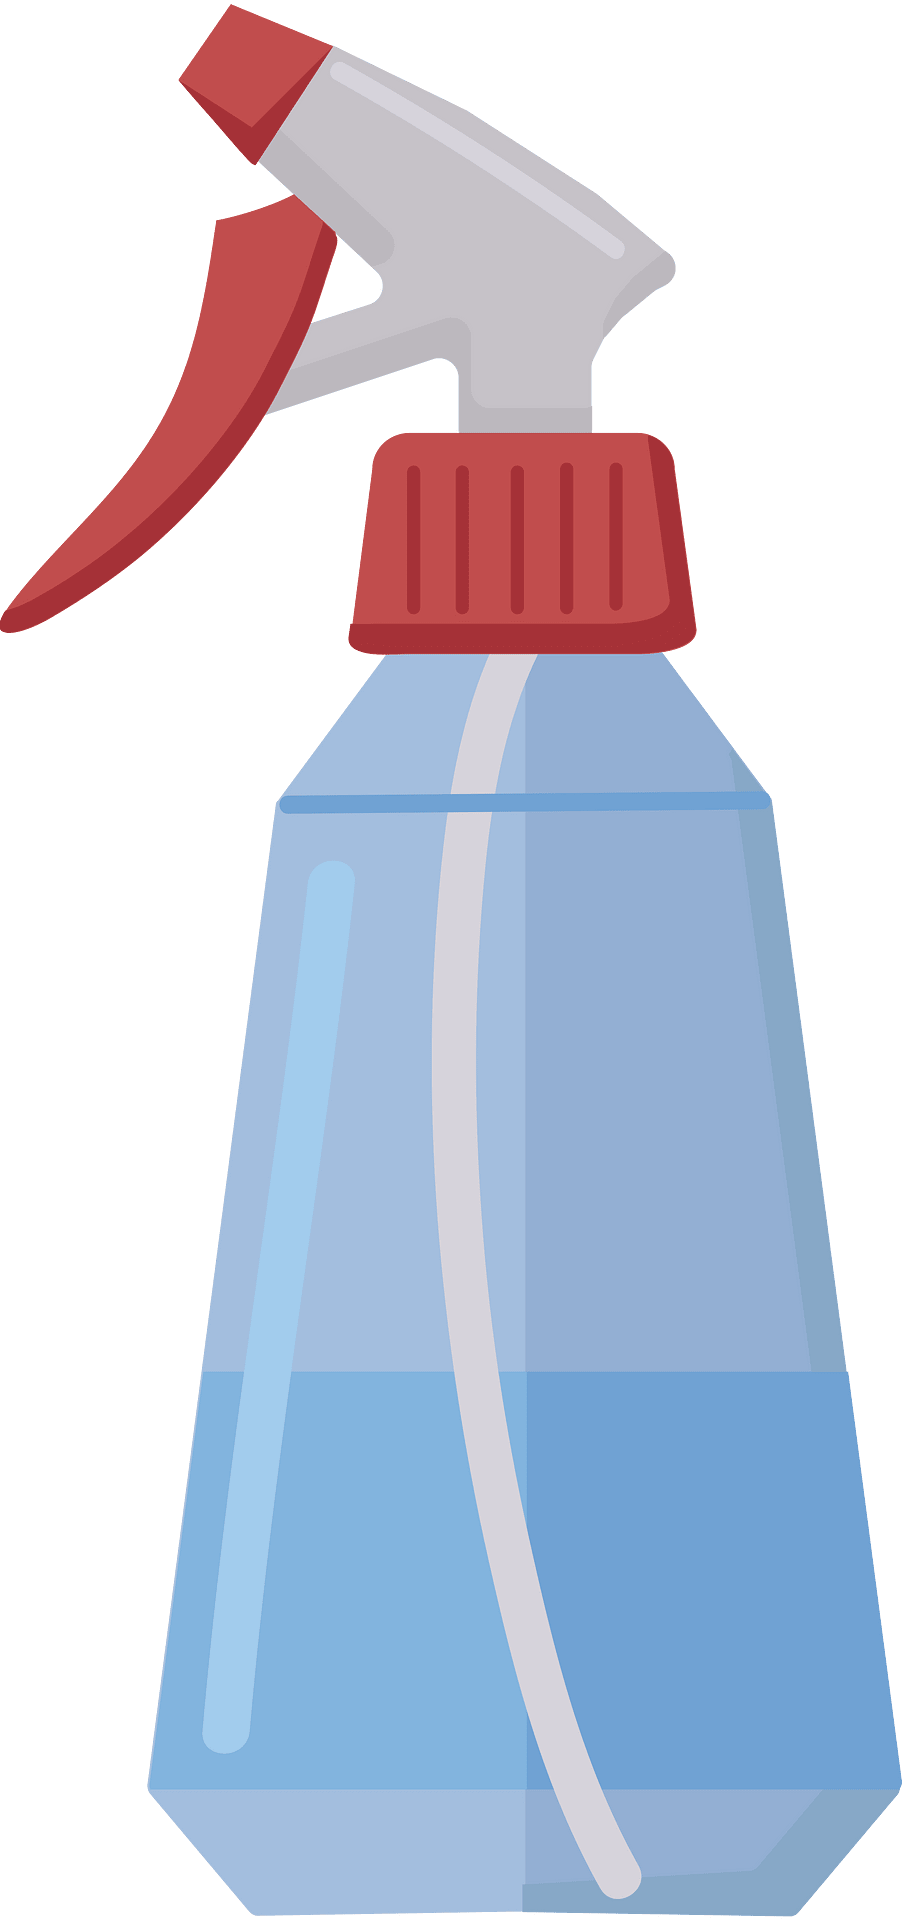 Spray Bottle Royalty Free Stock SVG Vector and Clip Art - Clip Art Library